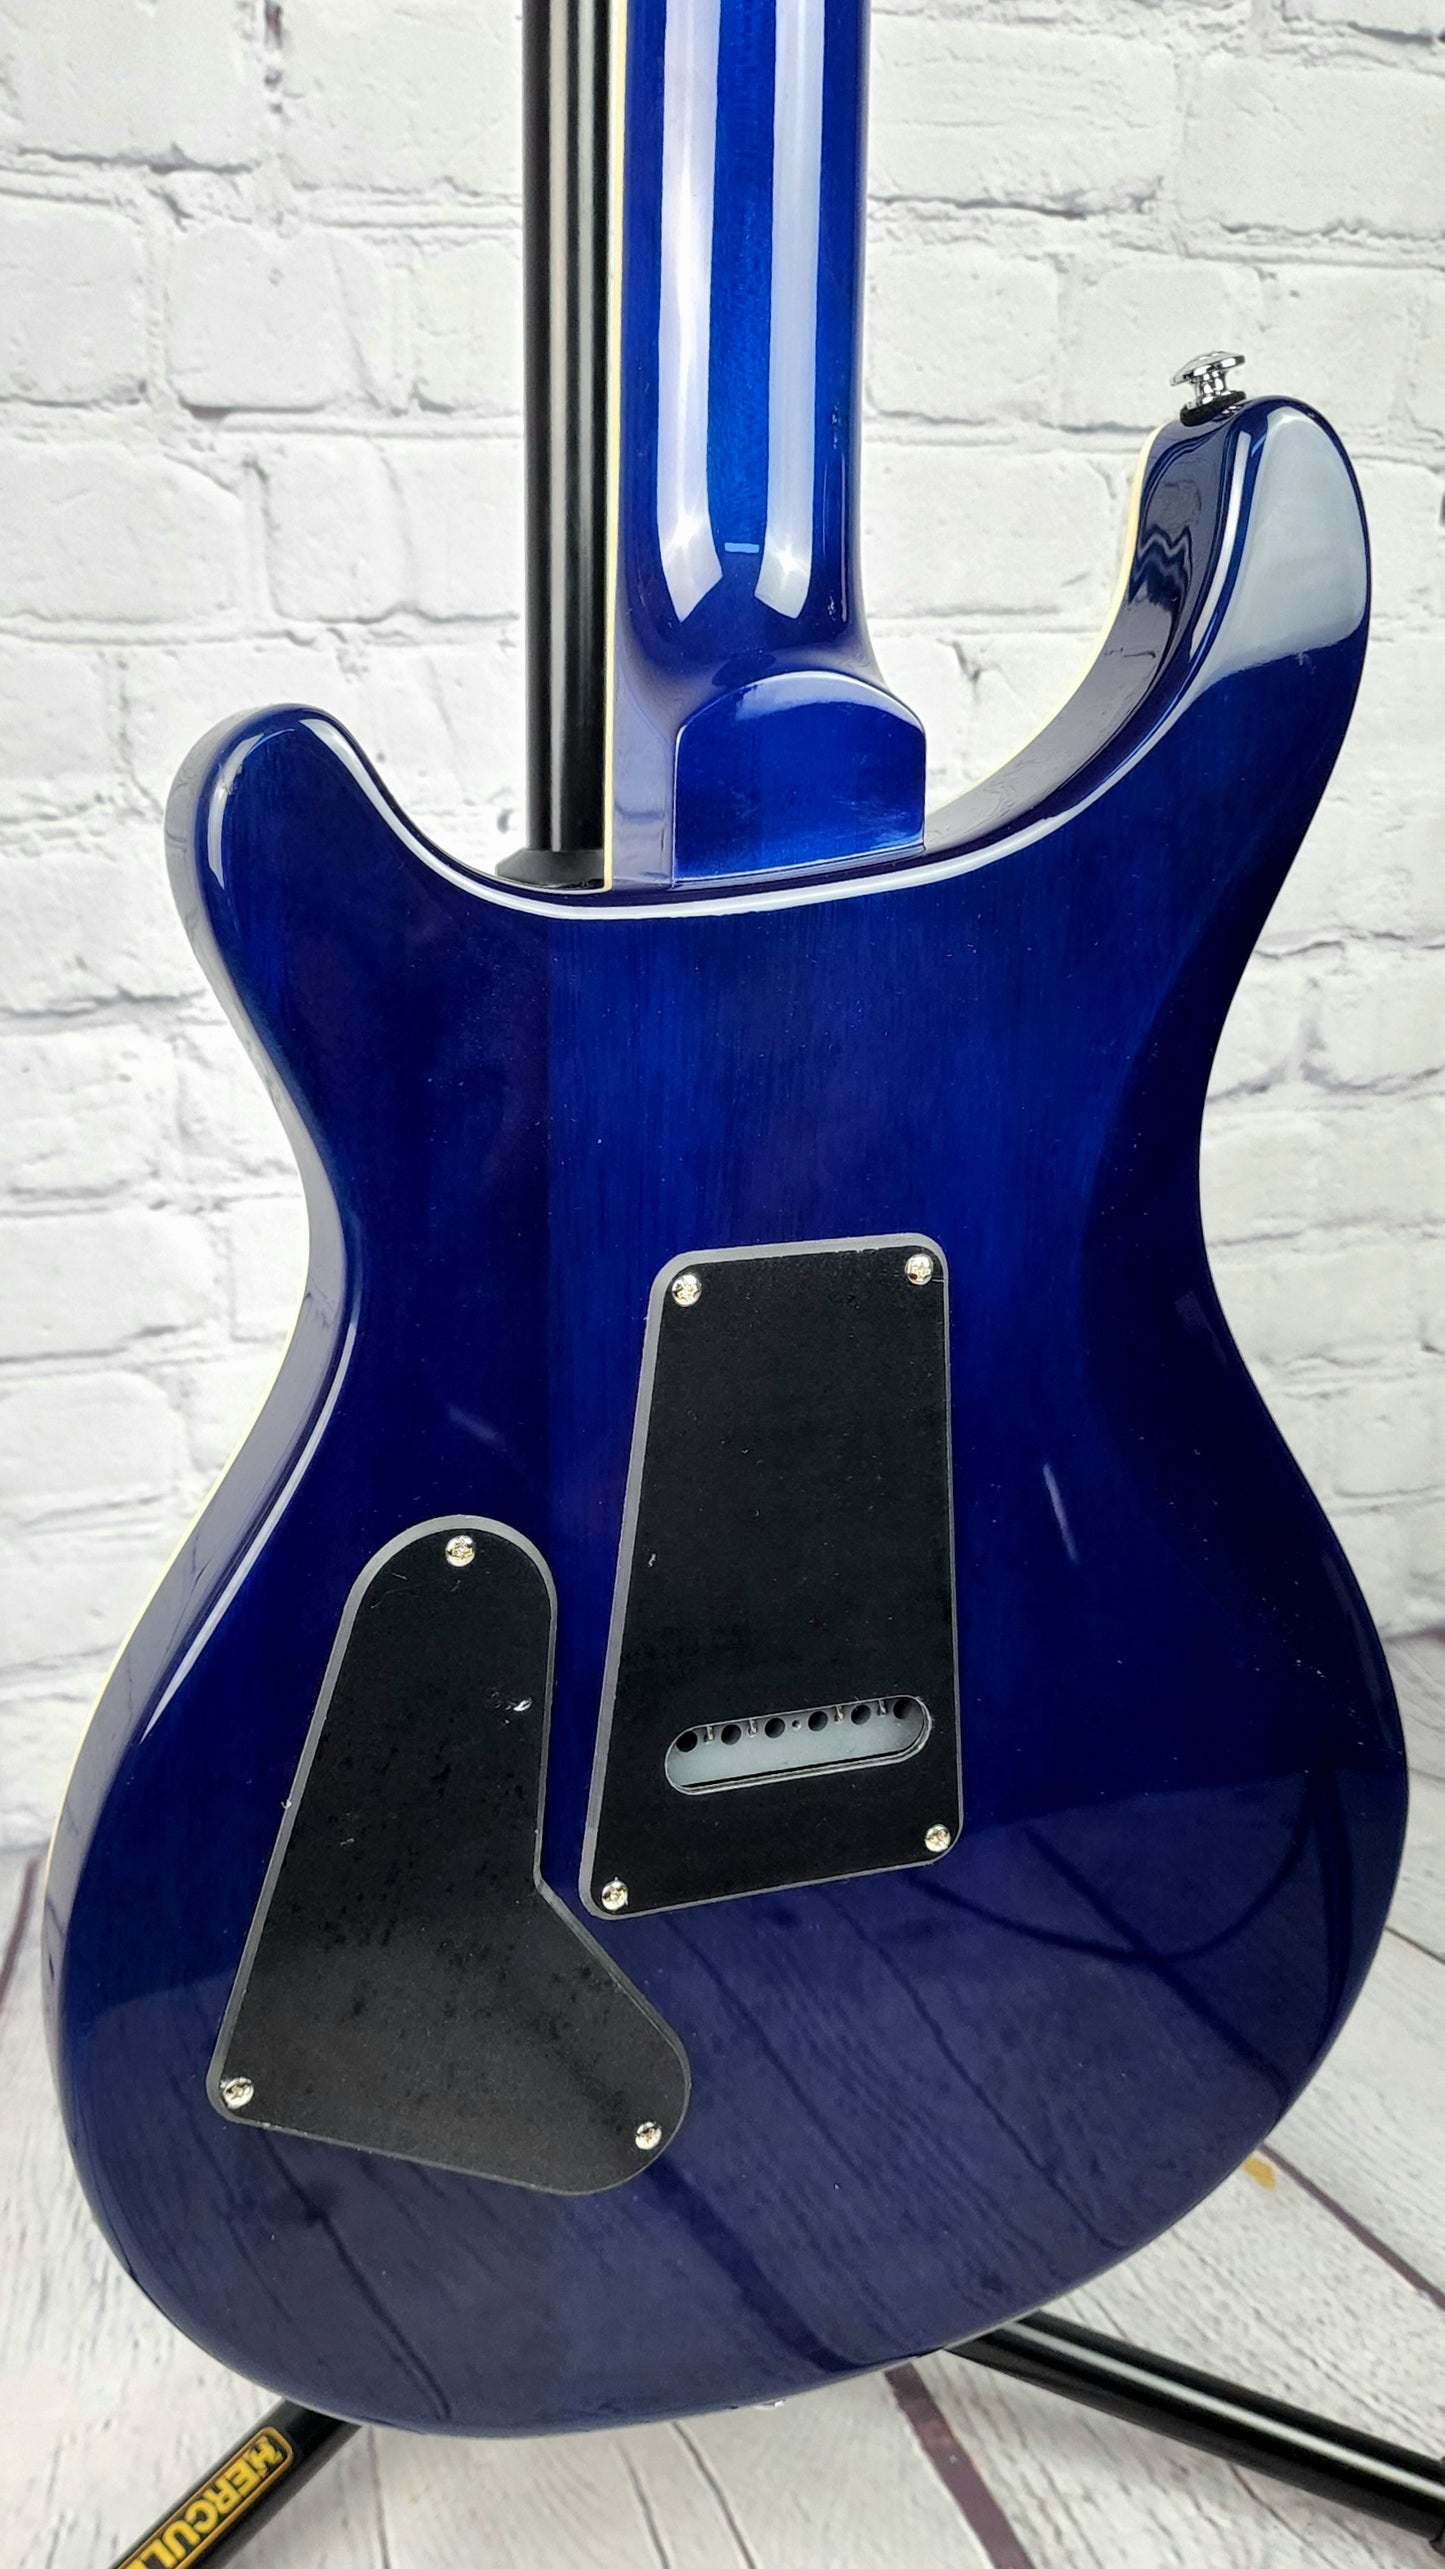 Paul Reed Smith PRS SE Standard 24-08 Electric Guitar Translucent Blue